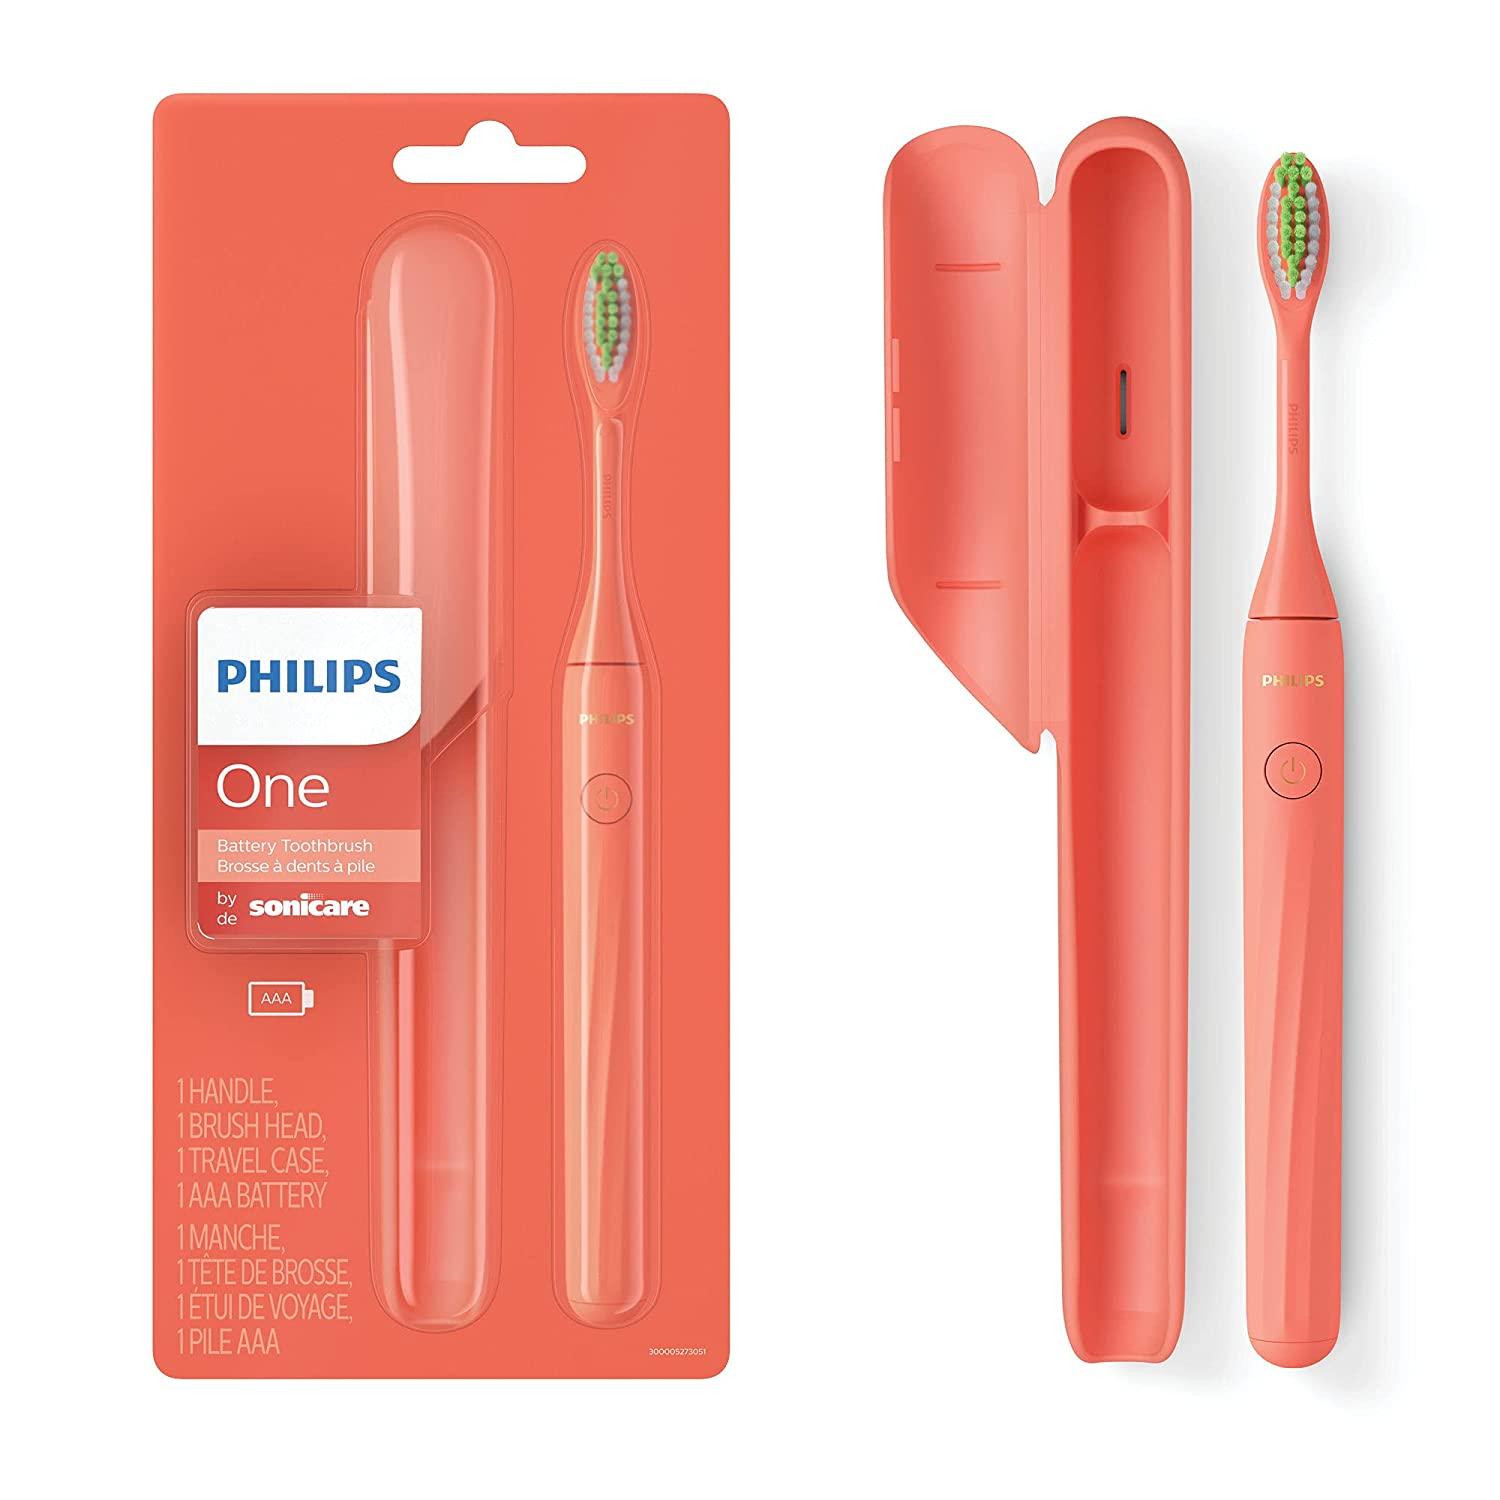 Philips One by Sonicare Battery Toothbrush for $14.95